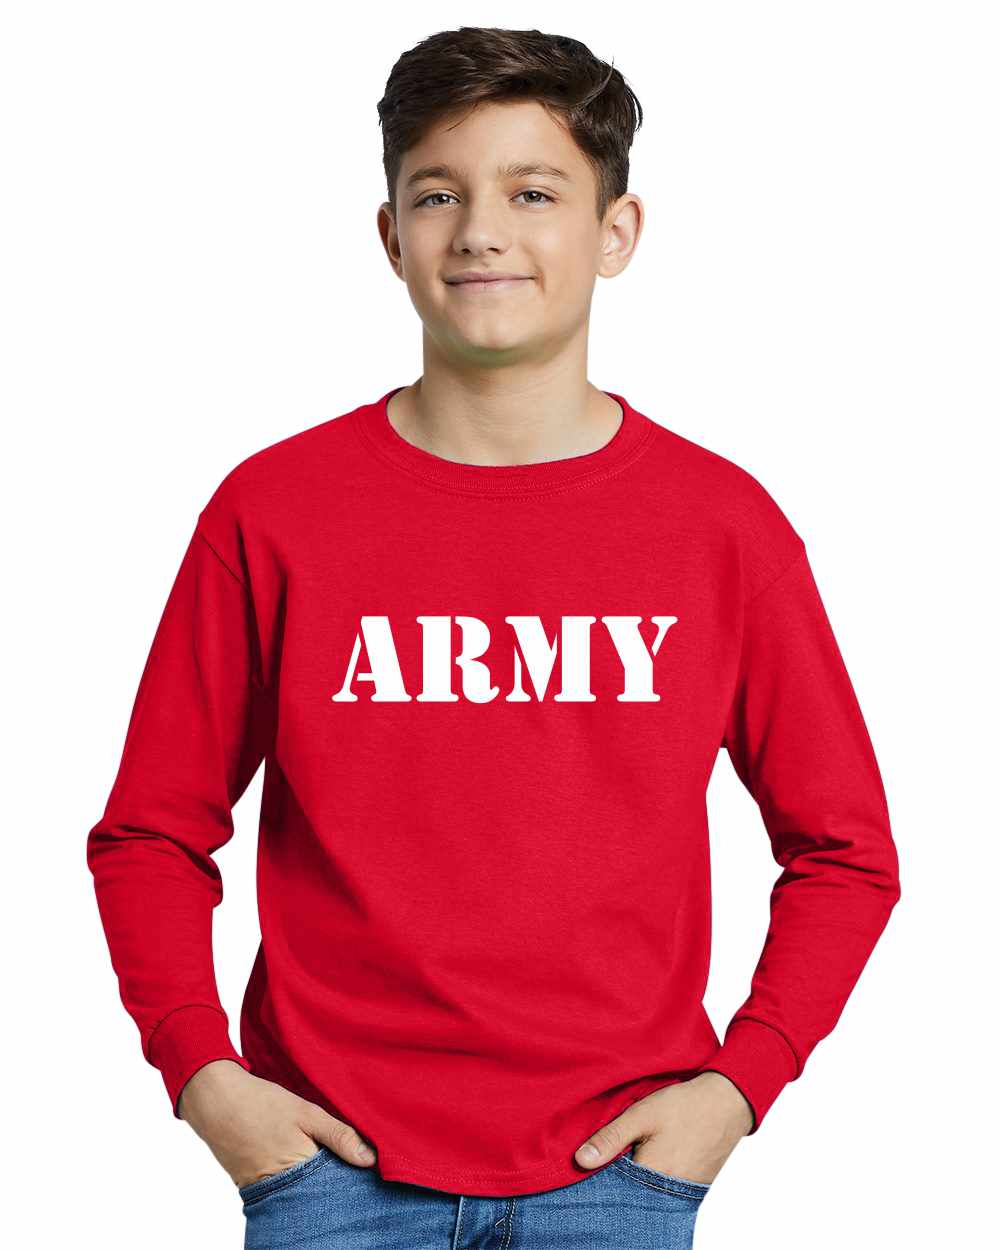 ARMY on Youth Long Sleeve Shirt (#338-203)